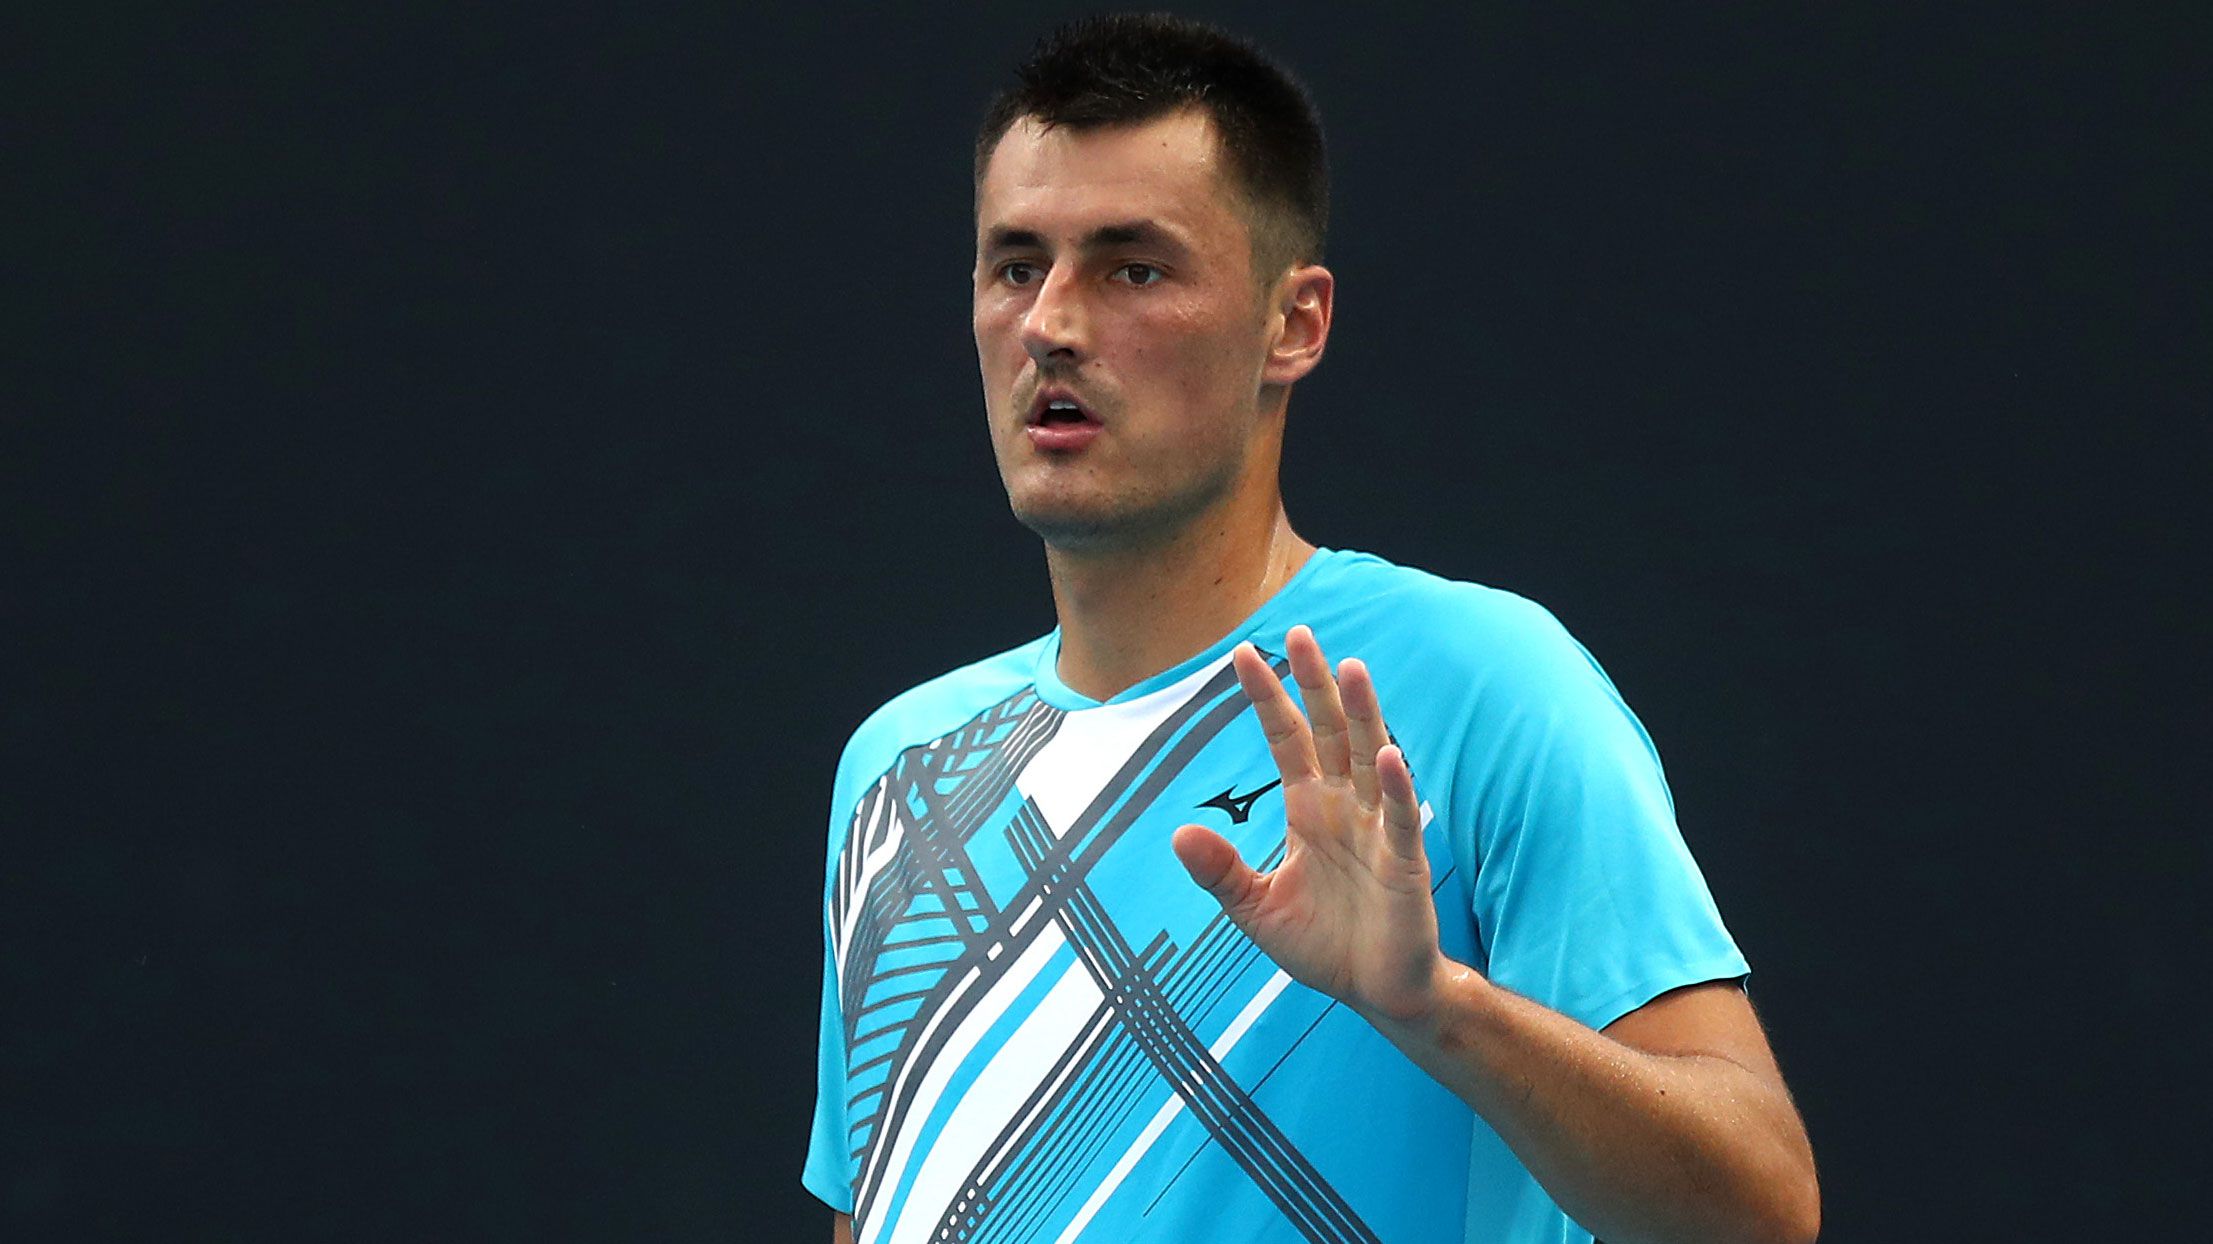 Bernard Tomic in action in the first round of the Australian Open.